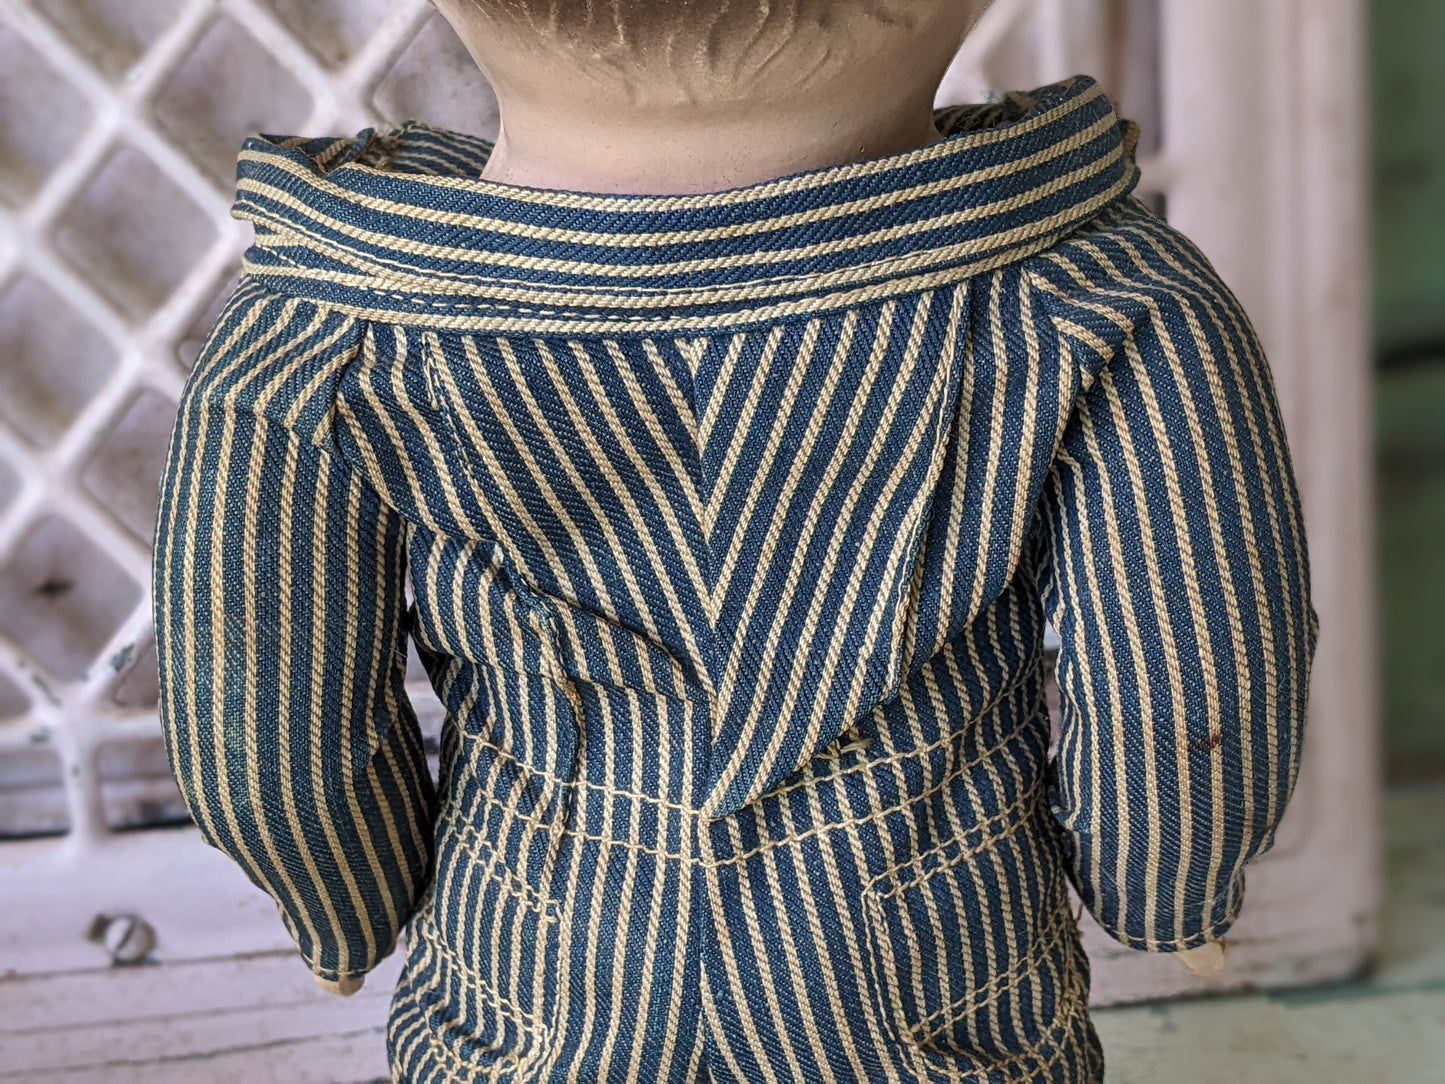 1930s Buddy Lee Doll !! Ultra-Rare Union-Alls V-Shaped Back Seam !! Amazing Advertising Vintage Gifts !!